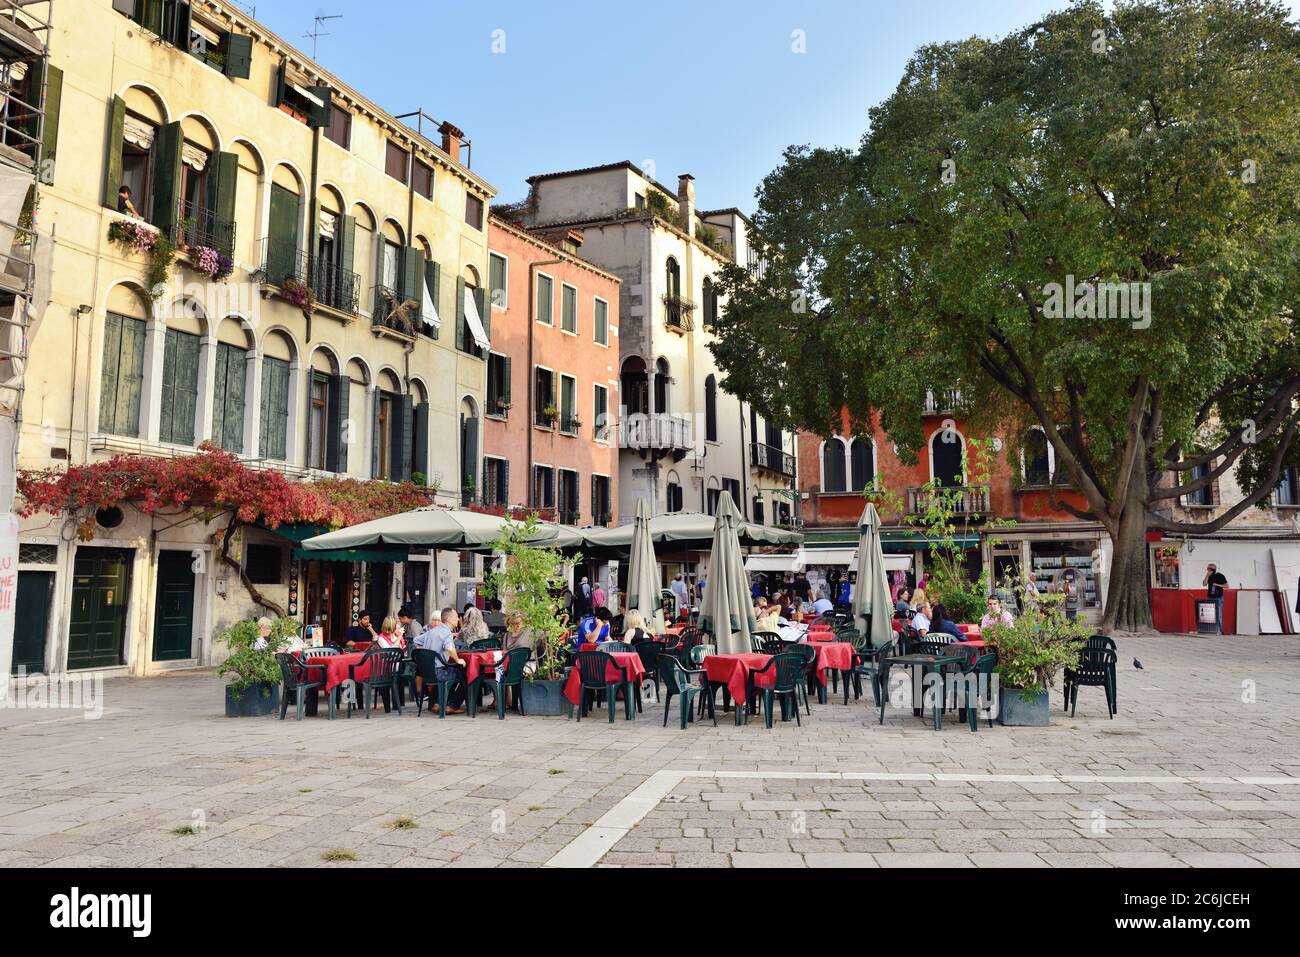 VENICE, ITALY - SEPT 21, 2014: People visit street cafe on square in Venice at evening time. This is the typical Venetian cafe Stock Photo